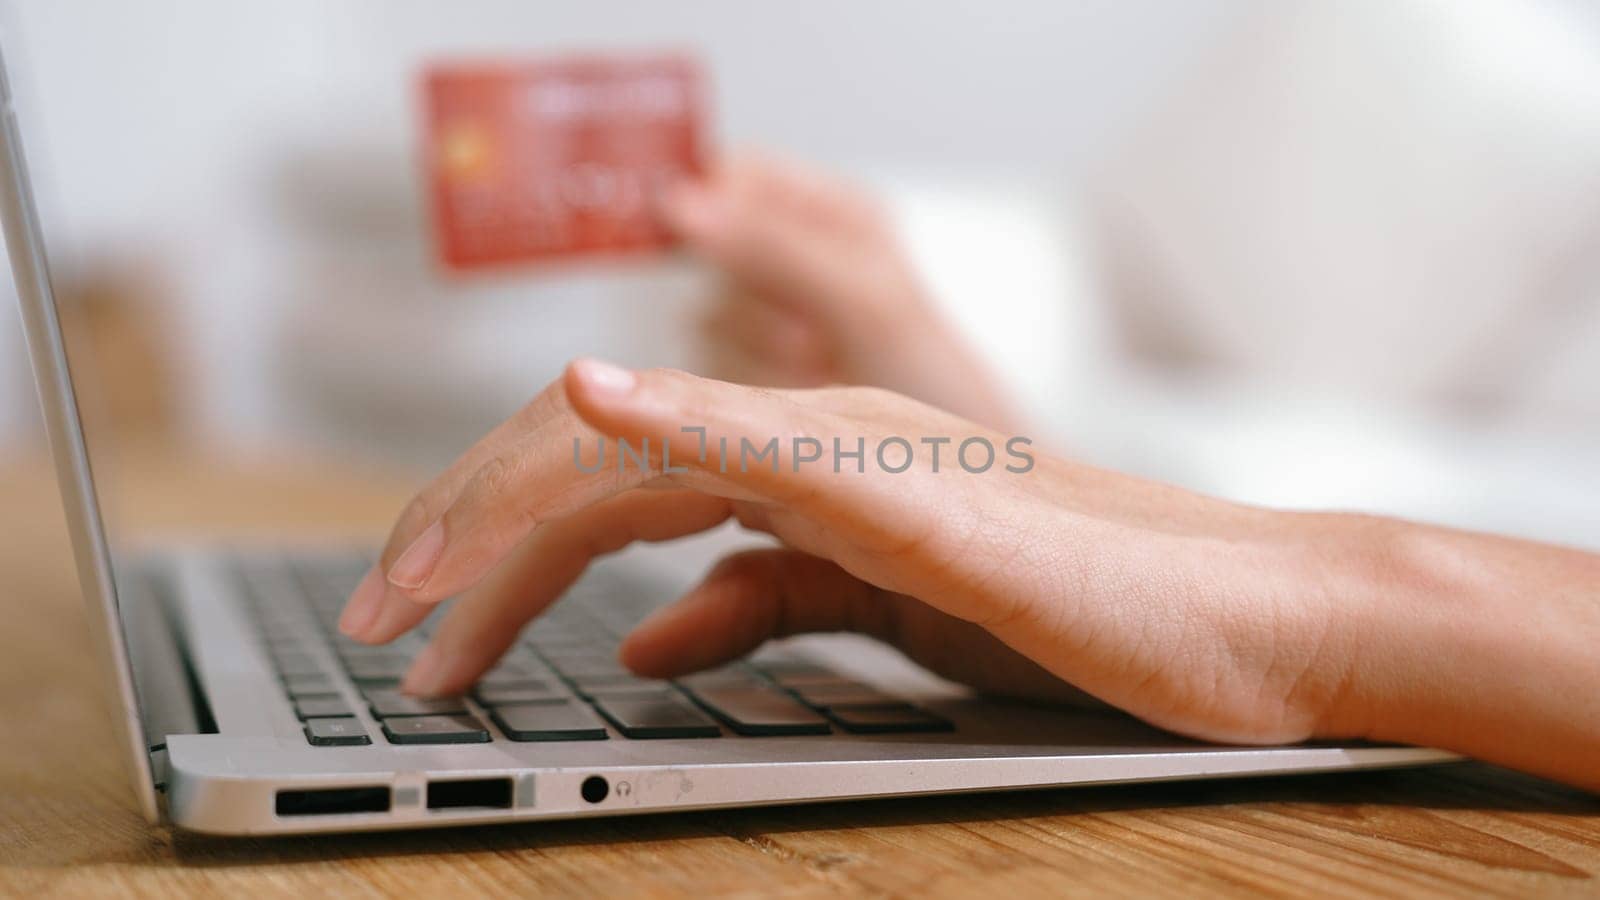 Woman shopping or pay bills online on internet vivancy shopping by biancoblue